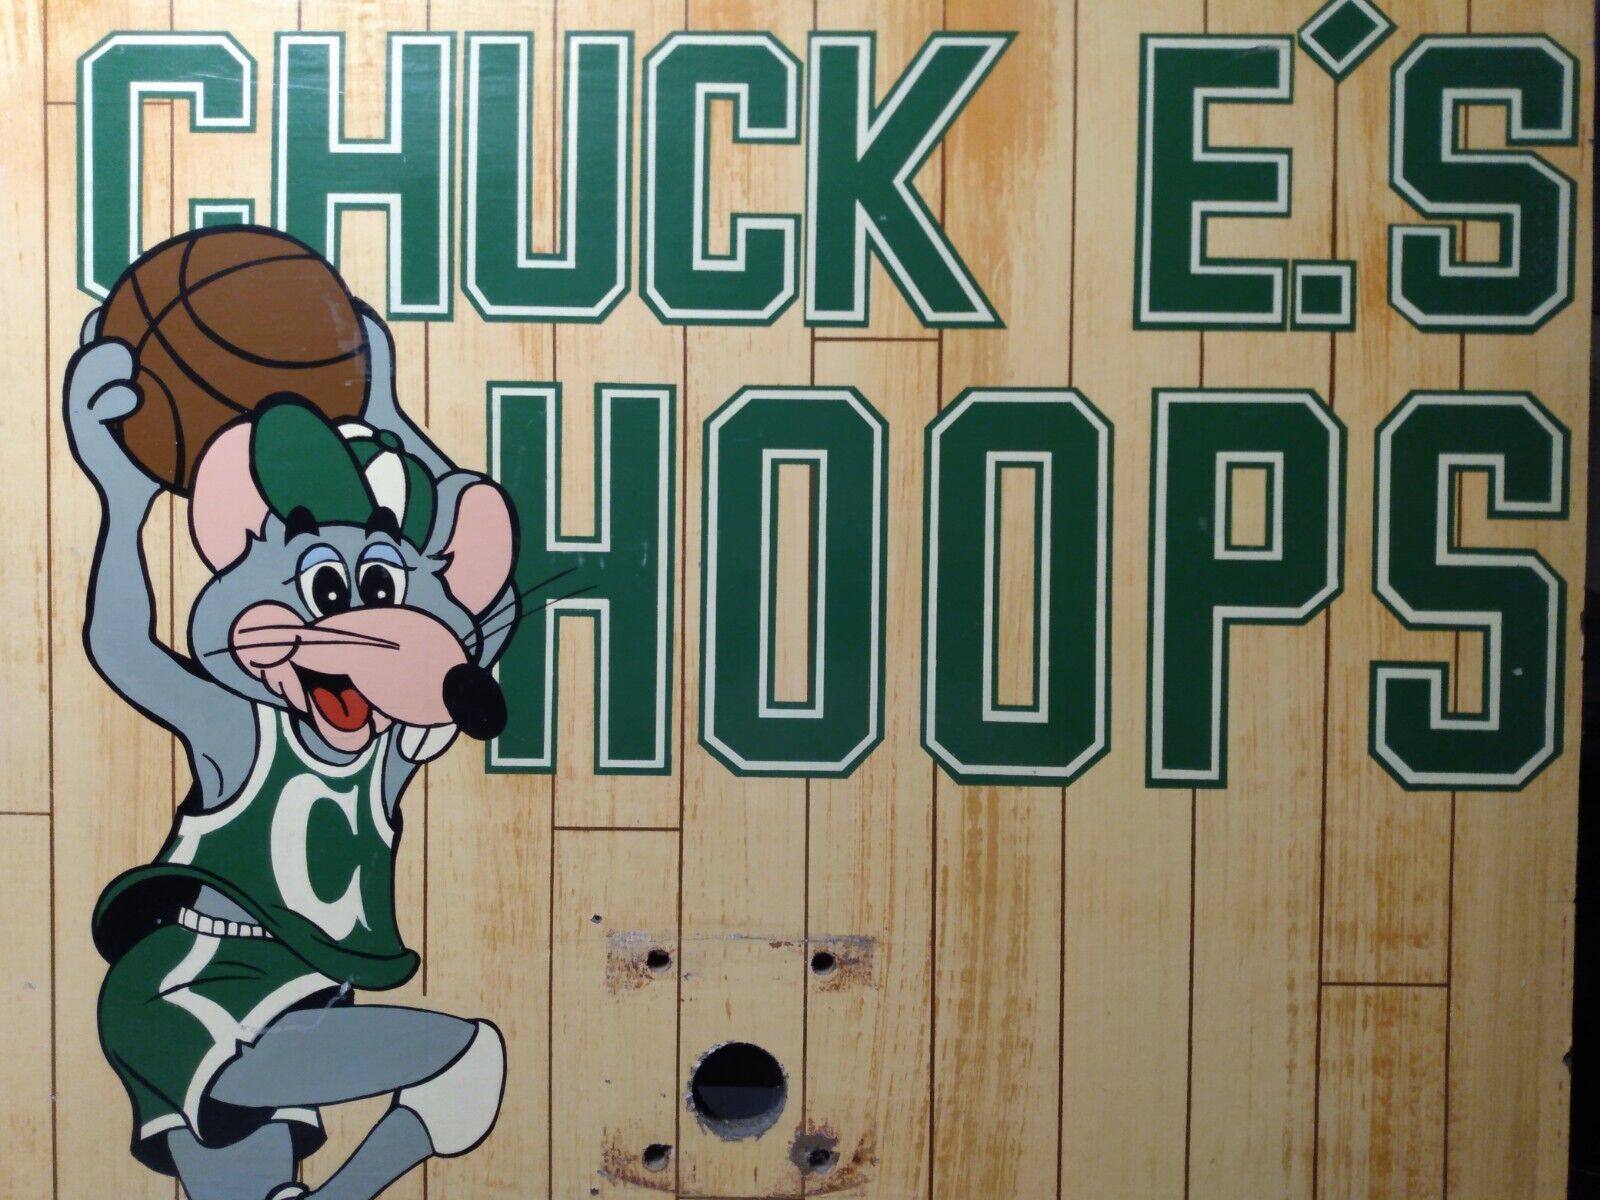 Chuck E. Cheese Hoops backboard, Late 70's early 80's Salvaged - Vintage 29×33